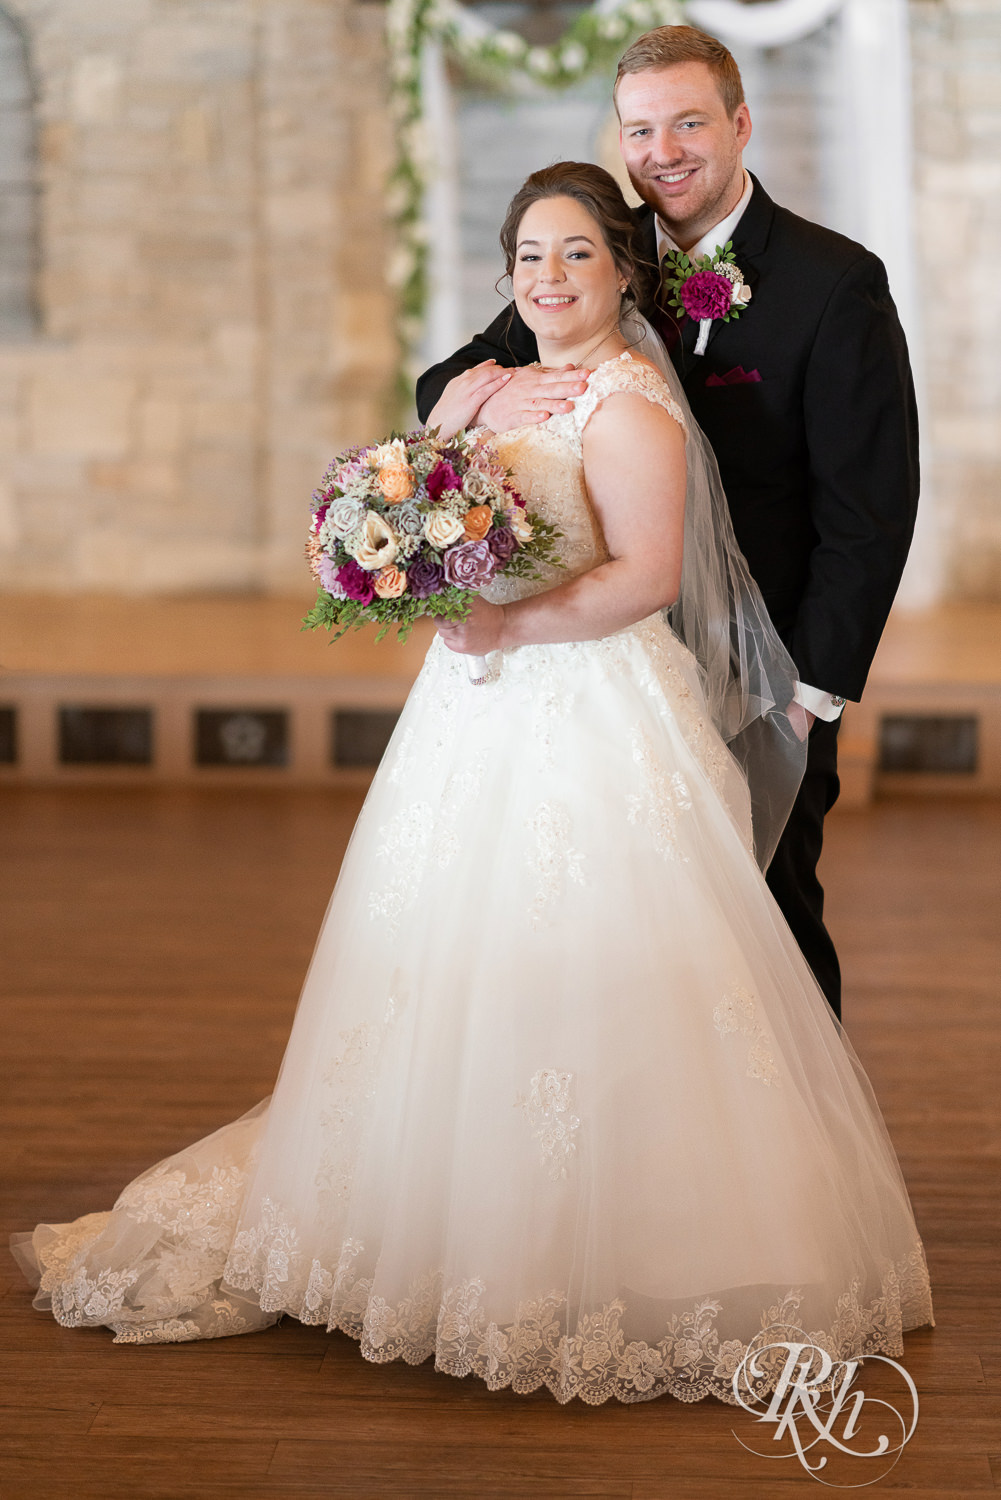 Bride and groom smiling at each other at Glenhaven Events in Farmington, Minnesota.